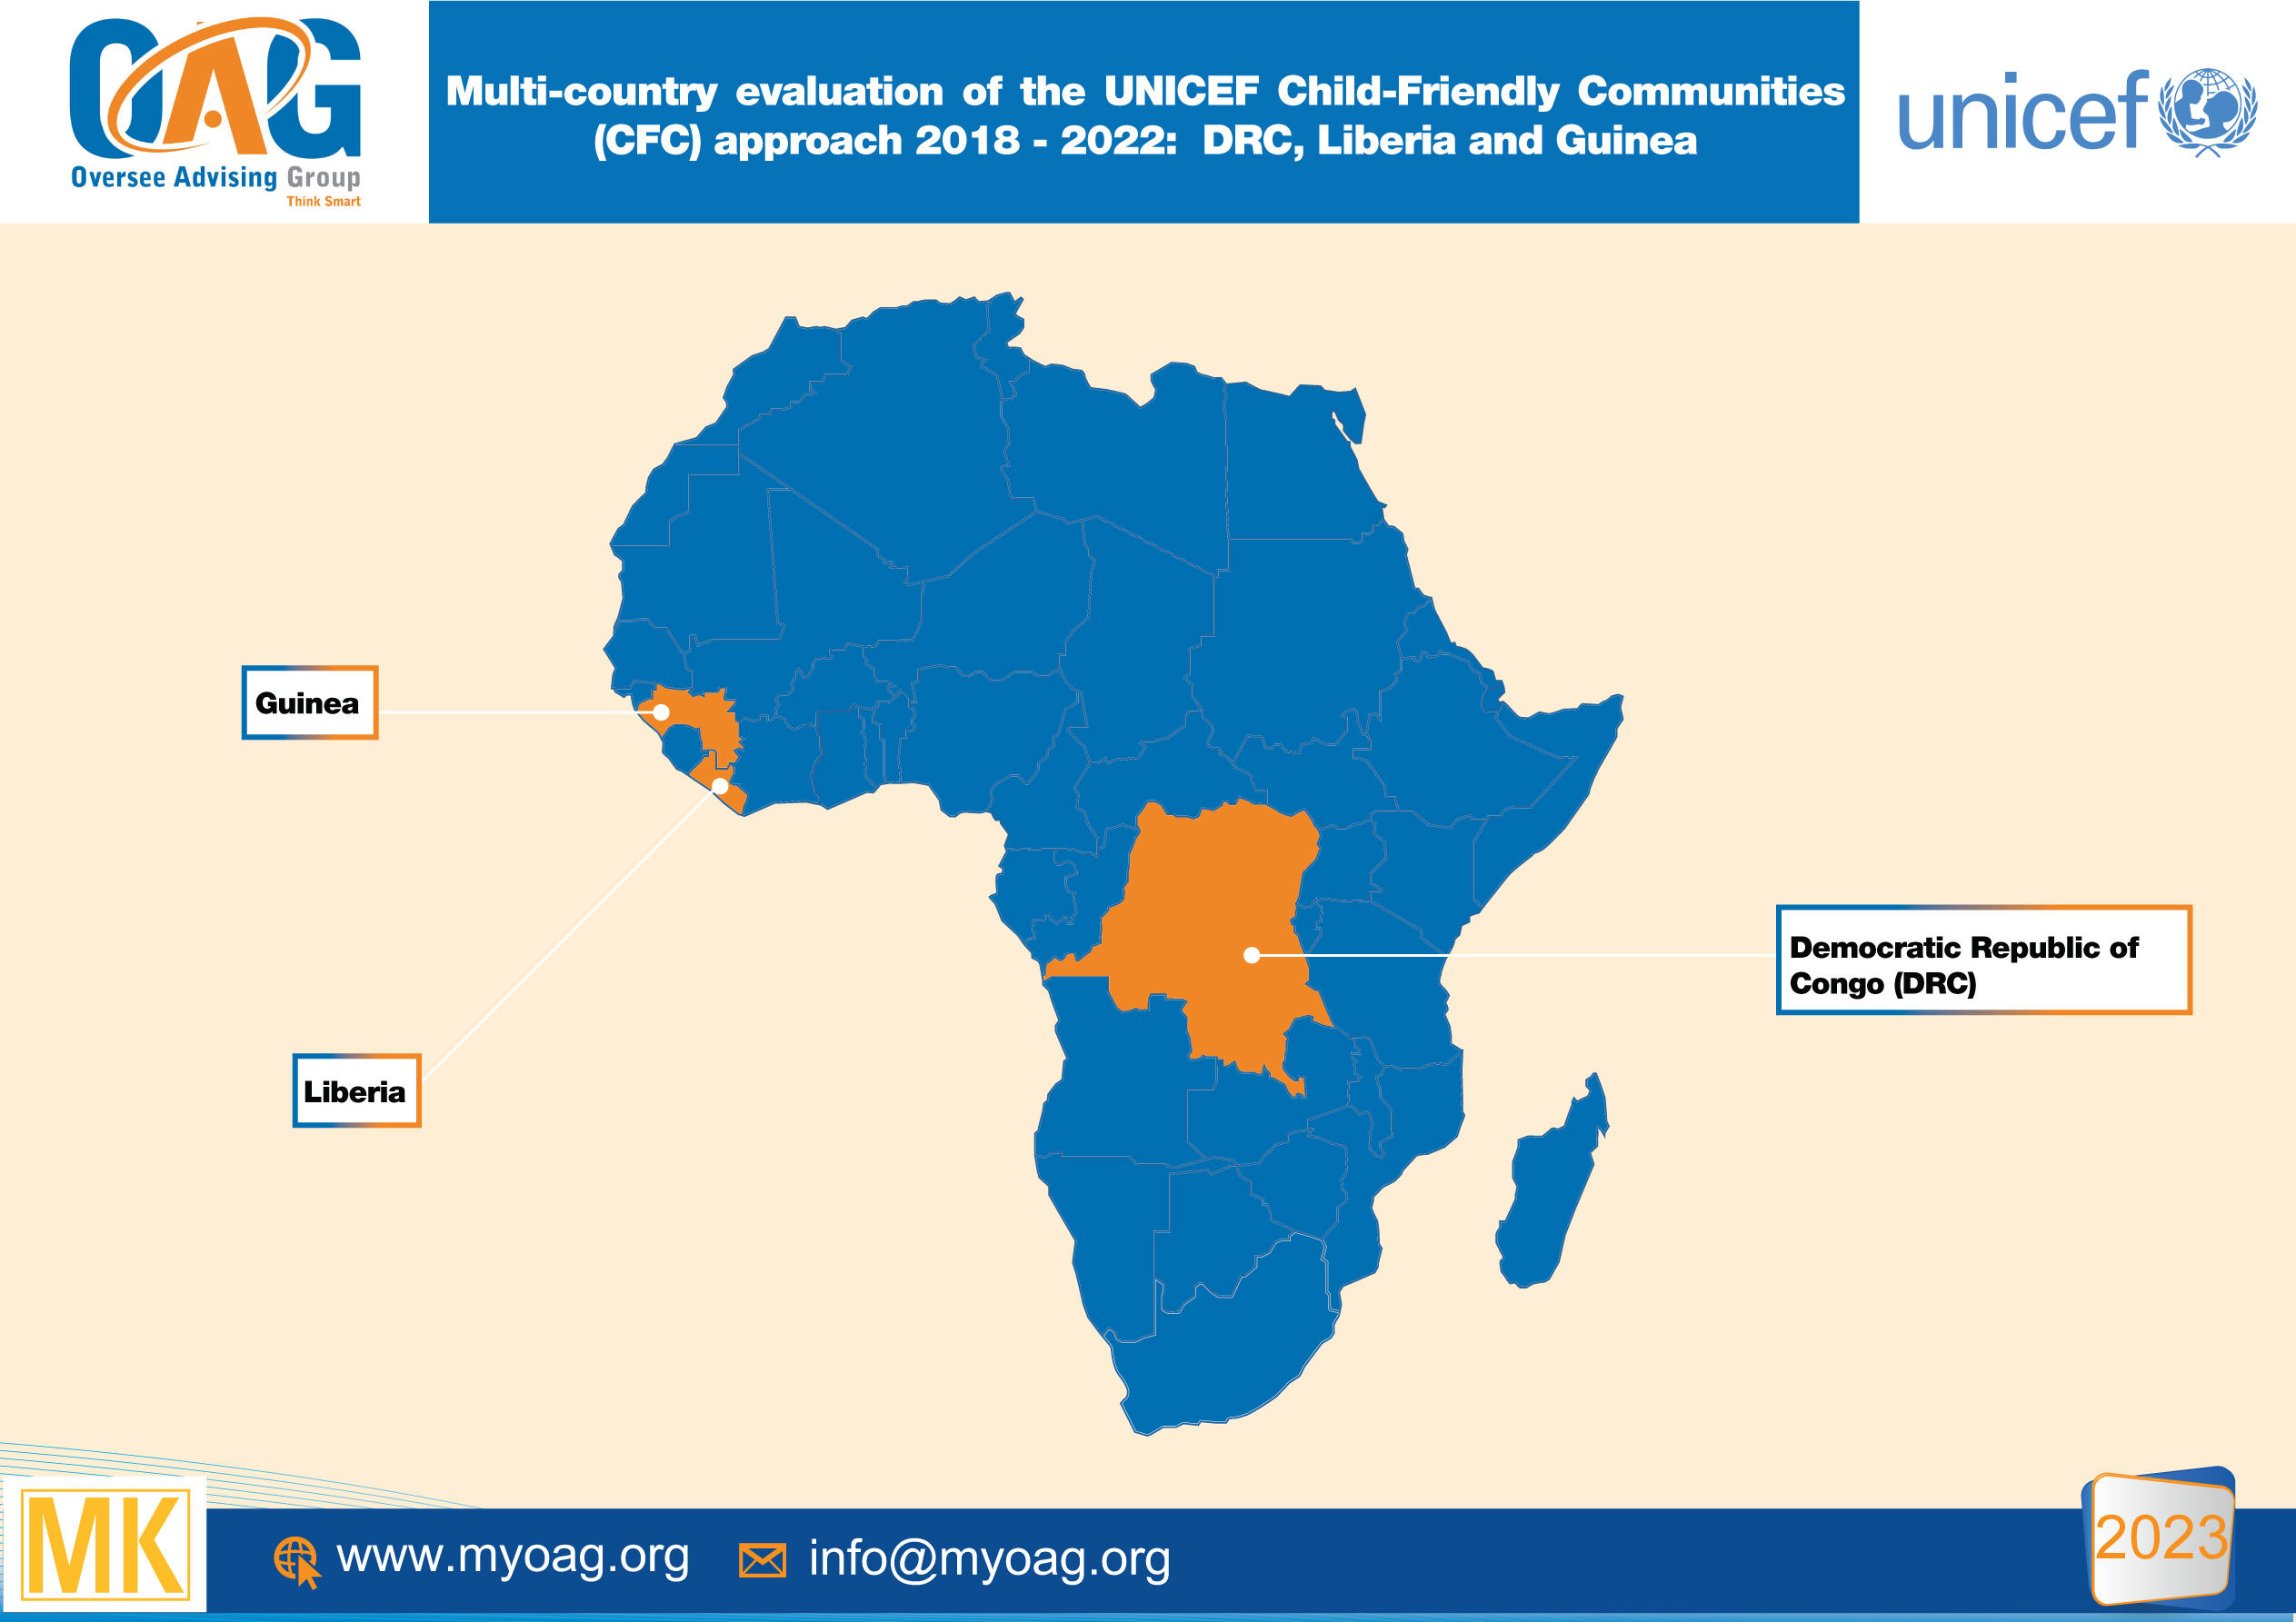 UNICEF : OAG has been awarded the contract for the Multi-country evaluation of the UNICEF Child-Friendly Communities (CFC) approach 2018 - 2022:  DRC, Liberia and Guinea